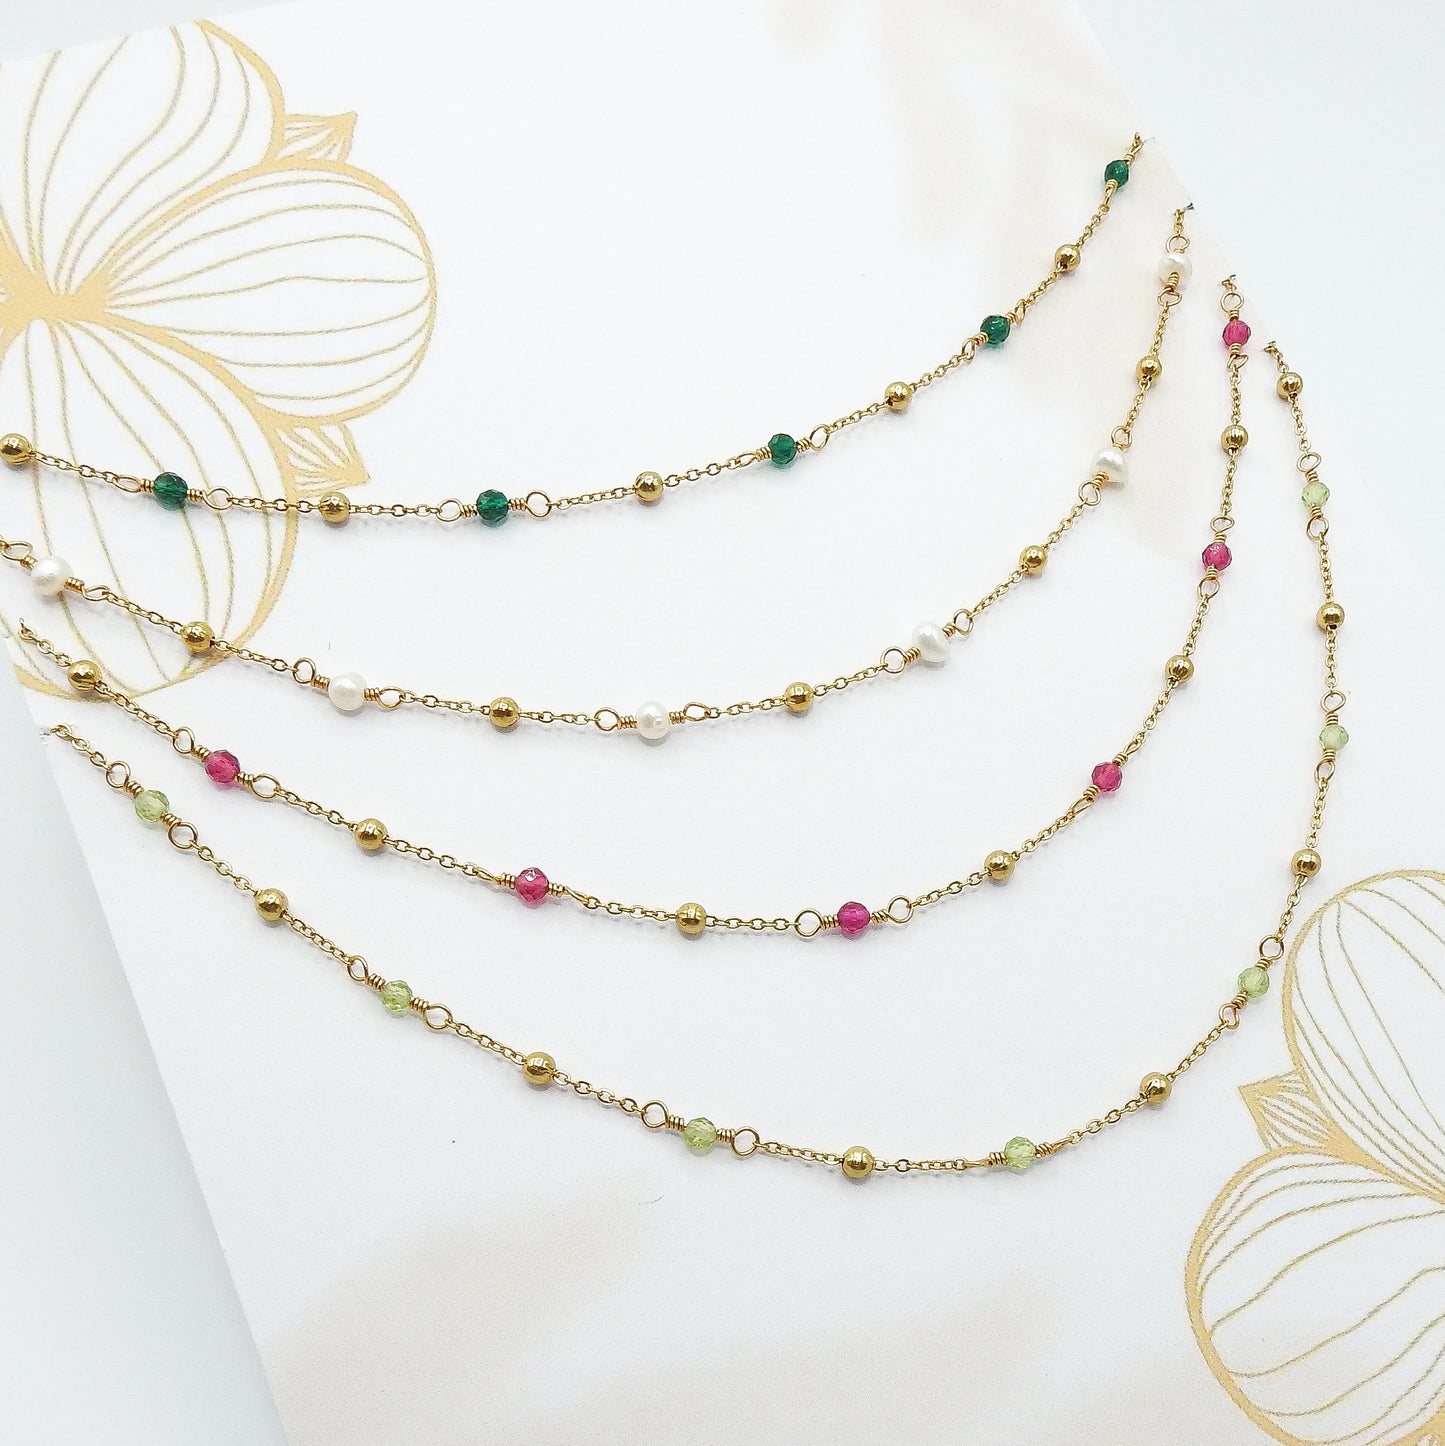 Pebble Birthstone Necklace With Natural Gemstones